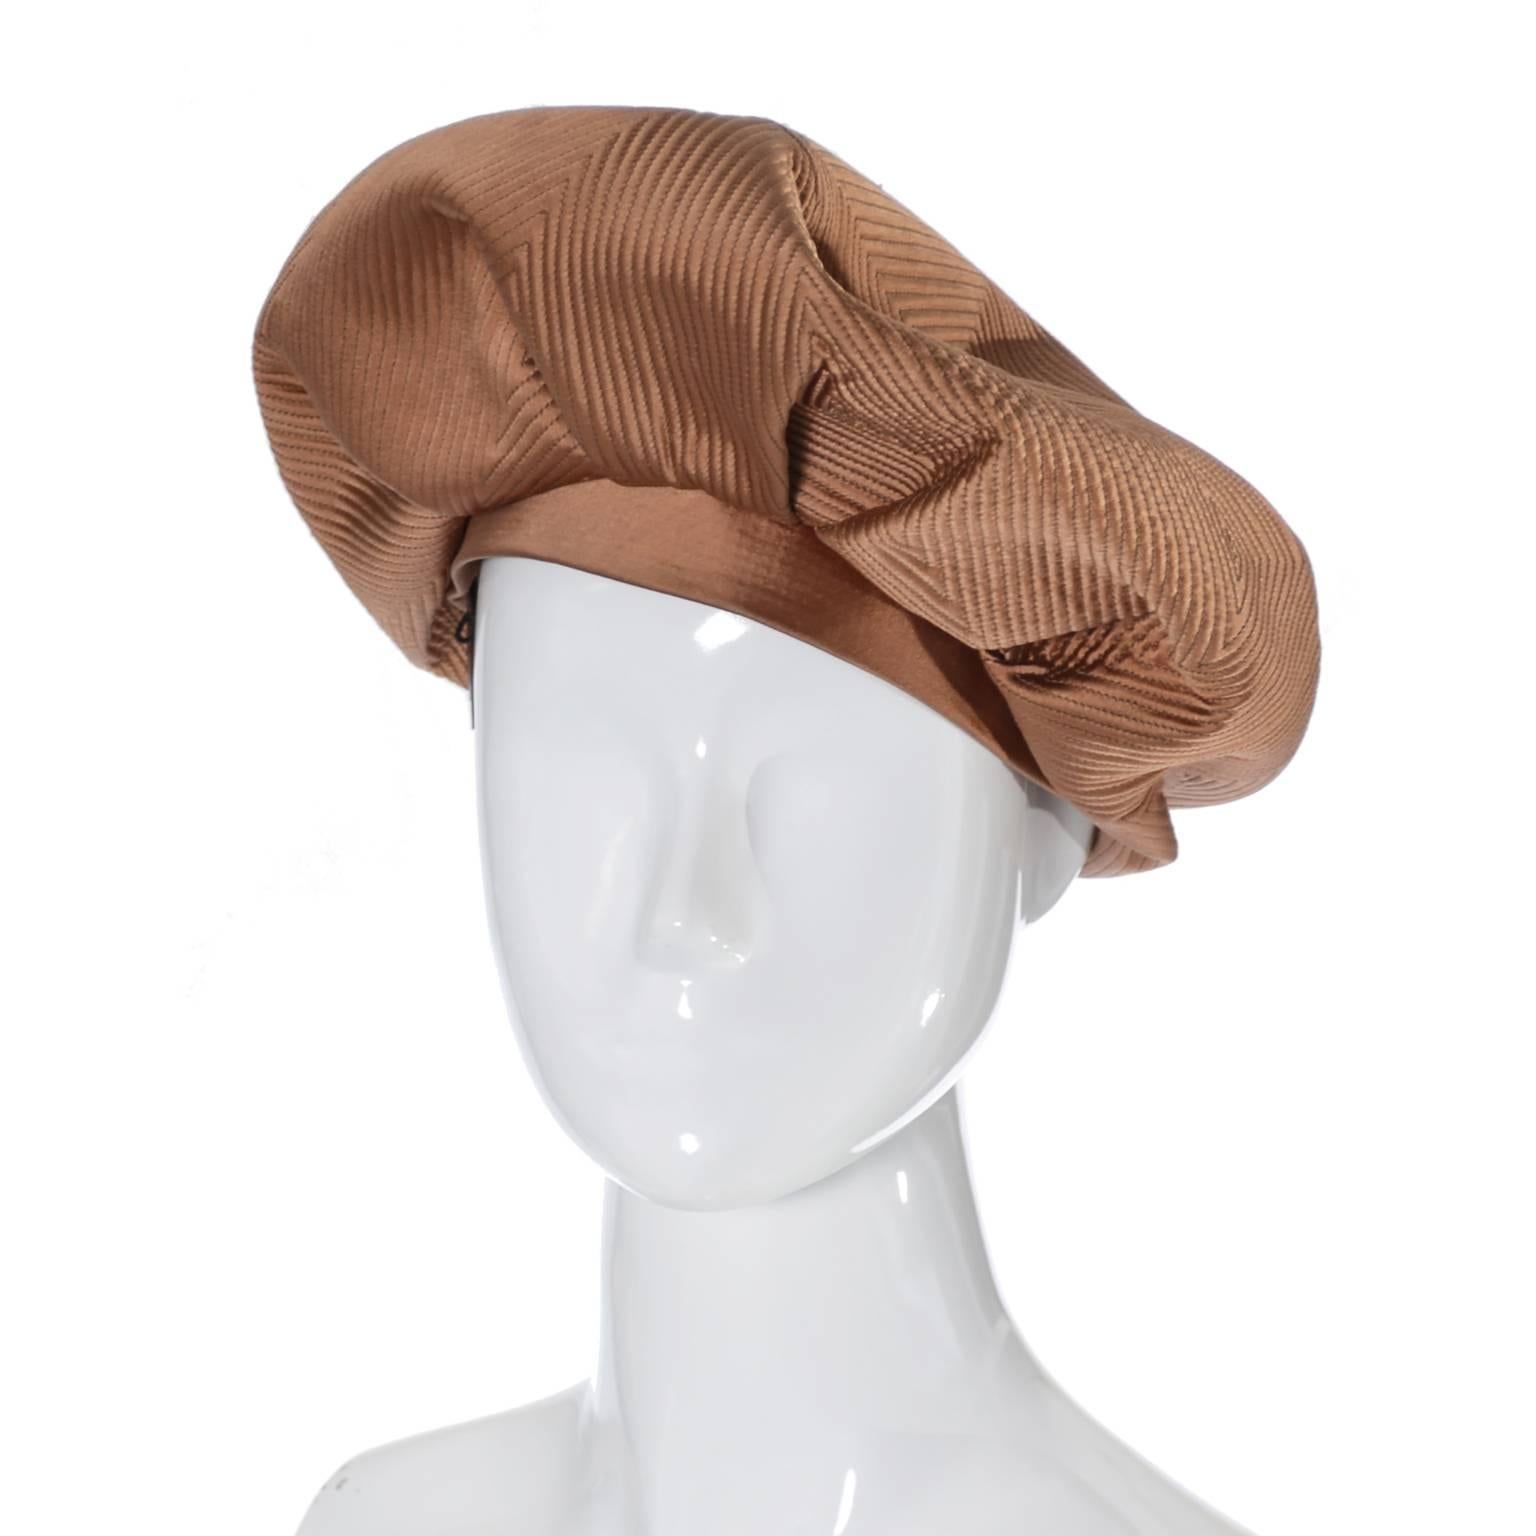 This is a beautiful copper satin vintage hat from the 1960's by John Frederics. This top stitched beret is in excellent condition and is from the late 60's and was made in America. This beautiful hat is in excellent condition and can be worn in many